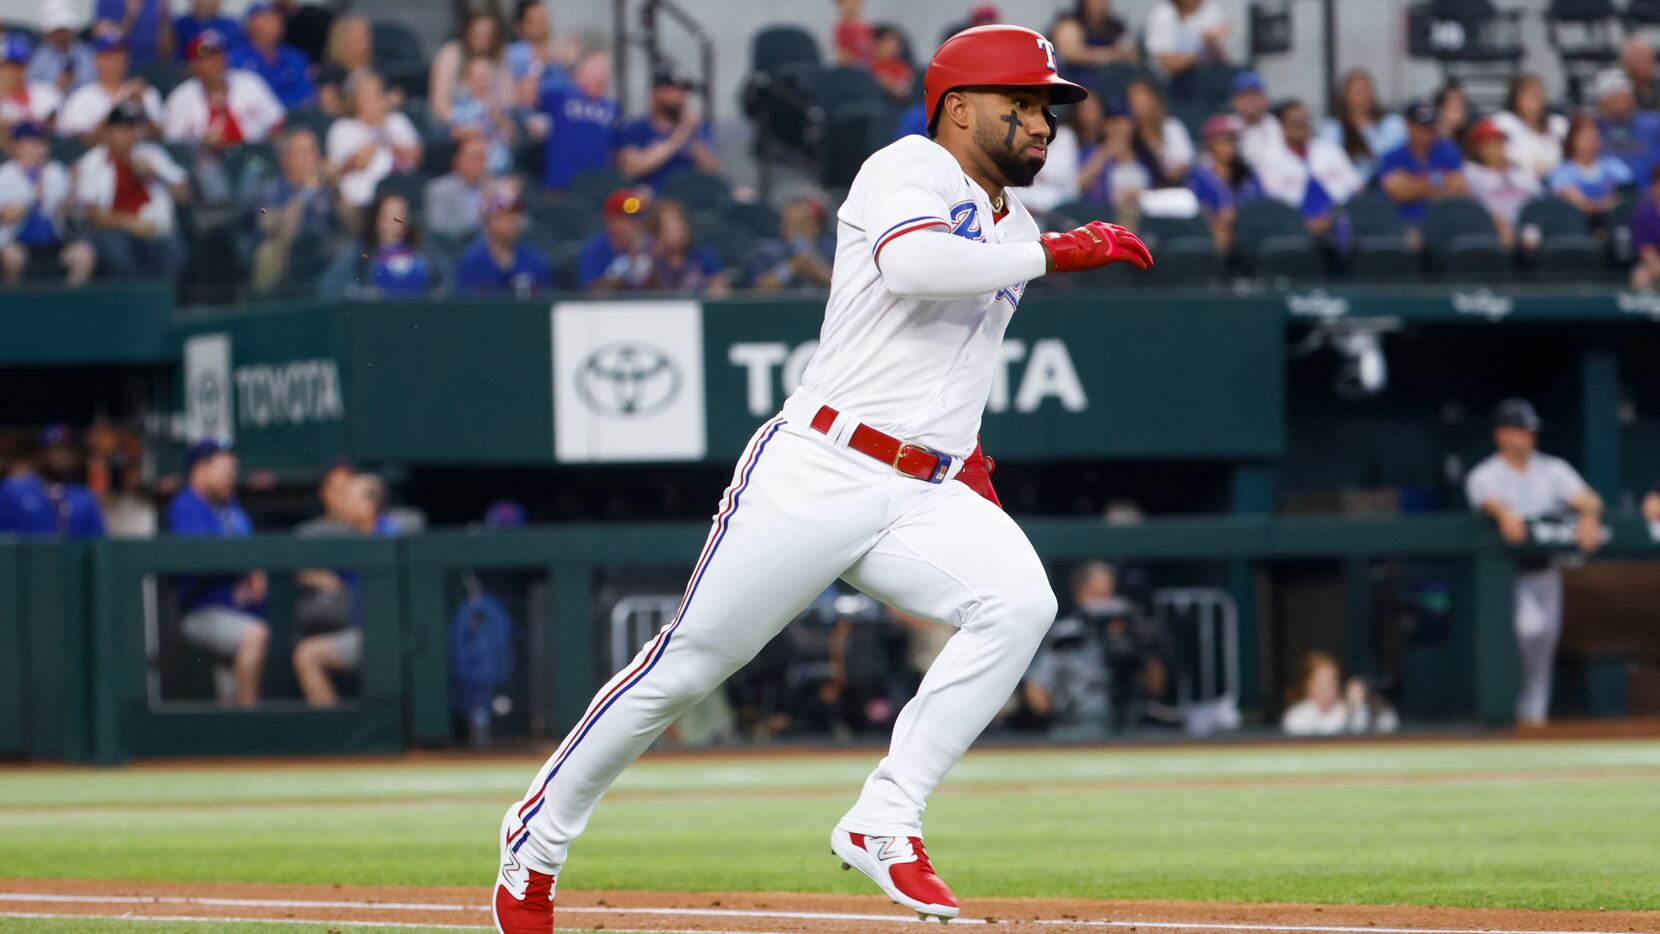 Texas Rangers shortstop Ezequiel Duran singles on a line drive during the first inning of a...